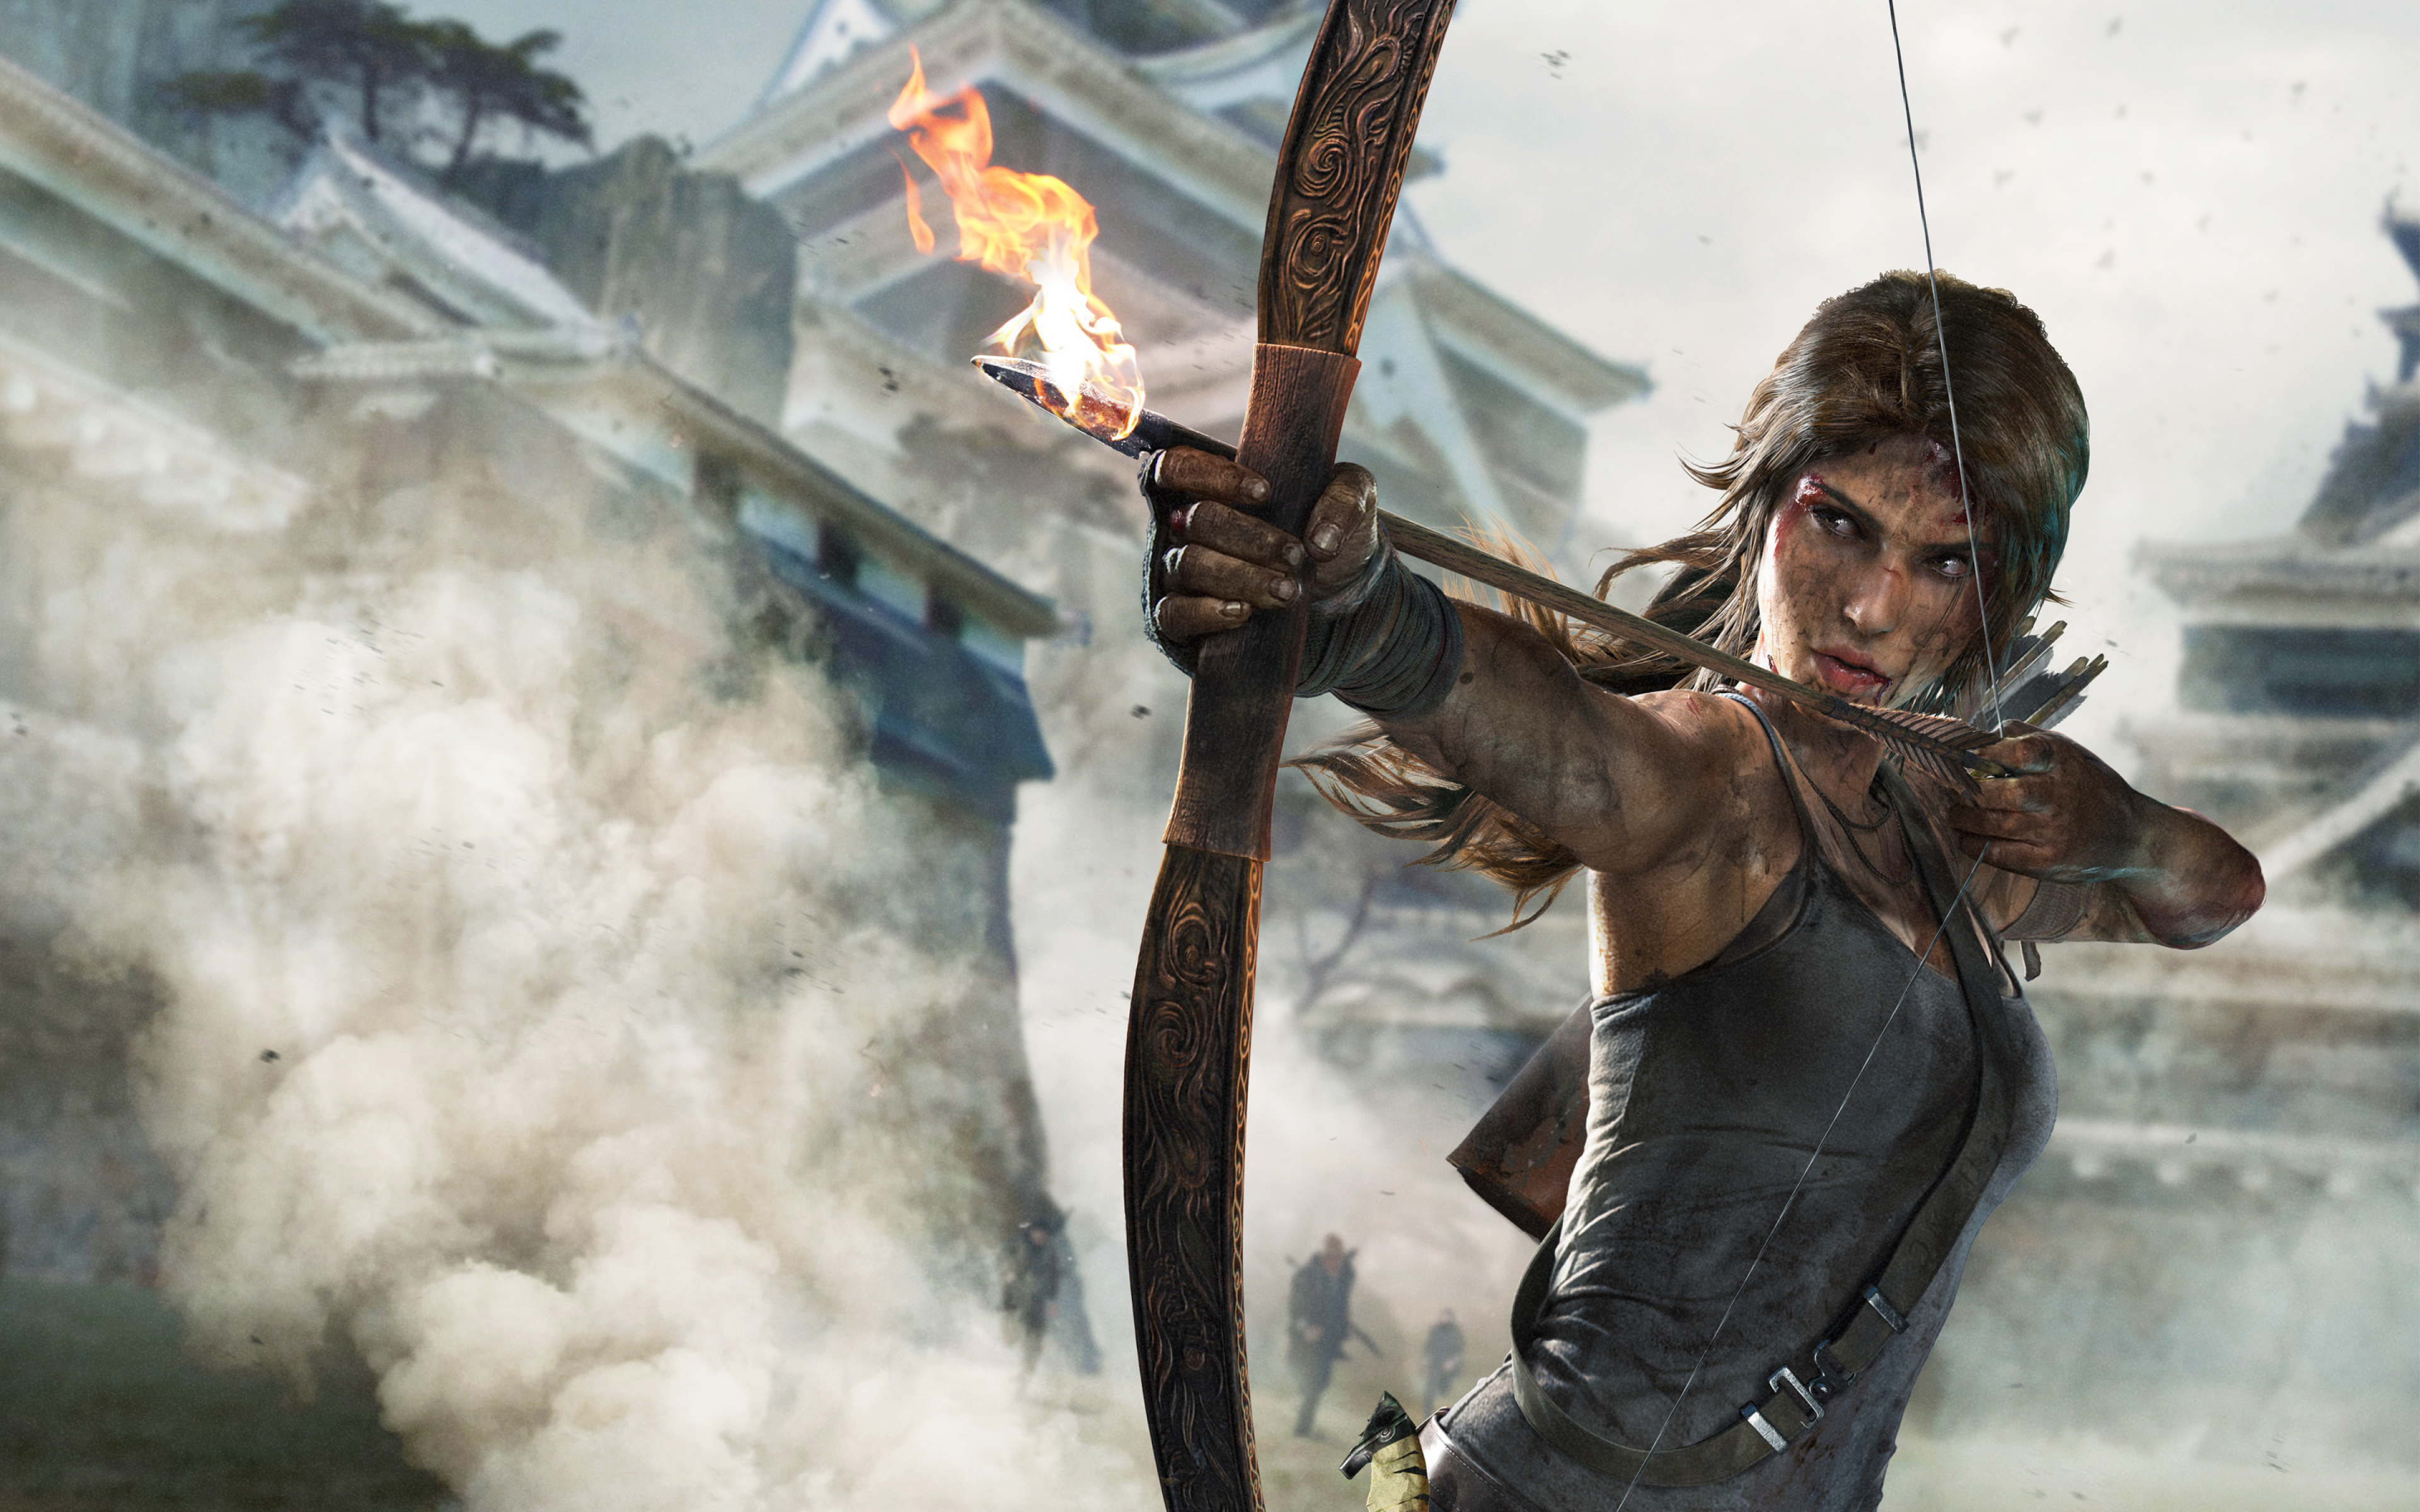 of the tomb raider download free